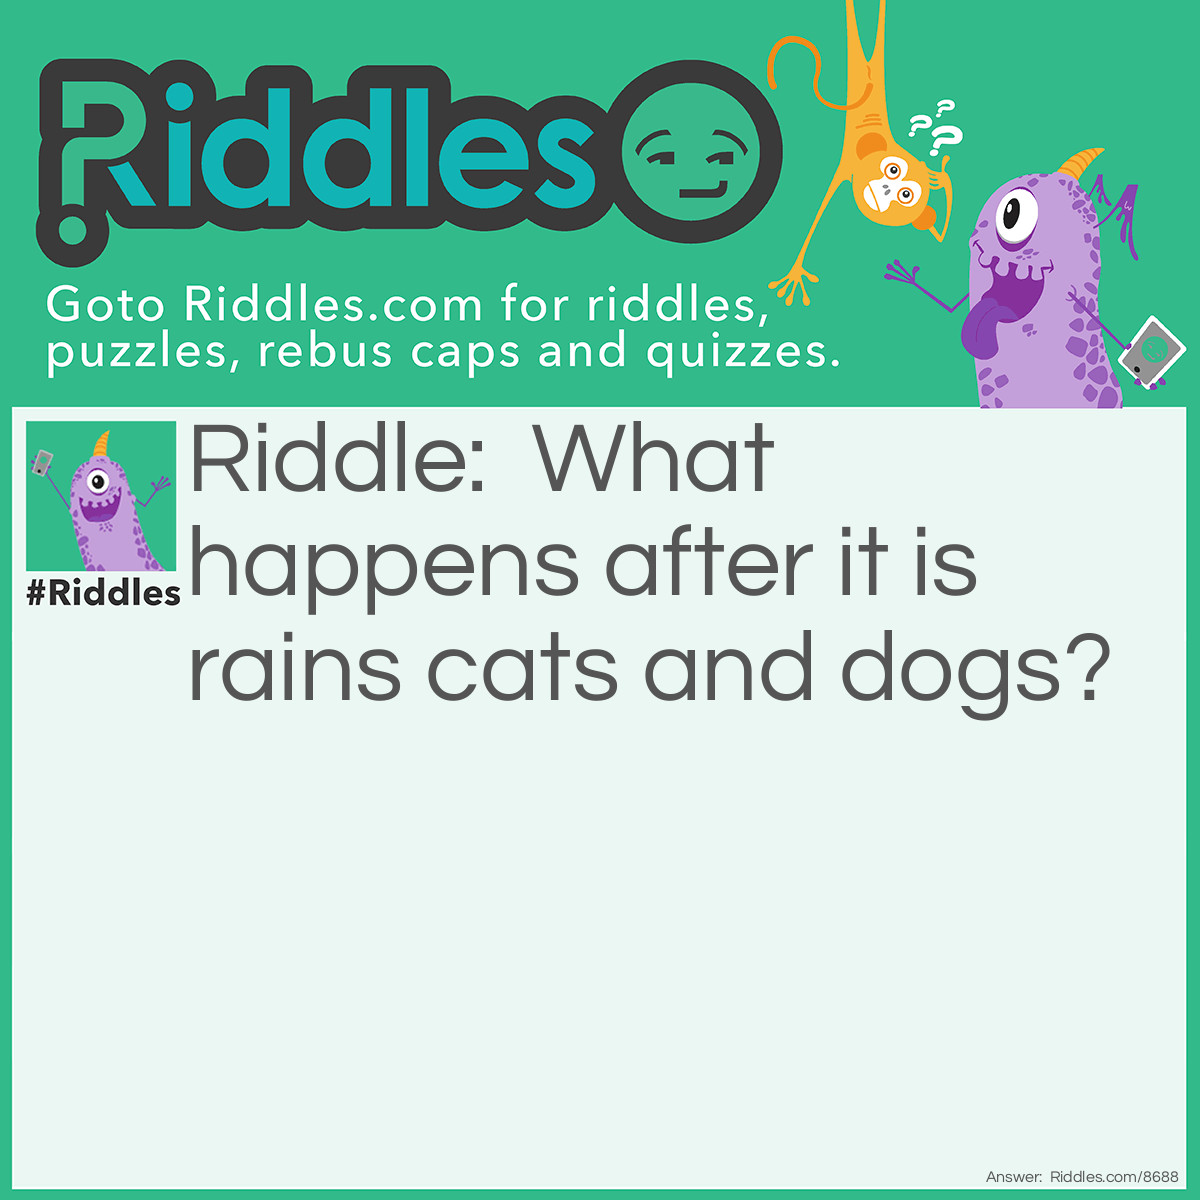 Riddle: What happens after it is rains cats and dogs? Answer: You step in a poodle.